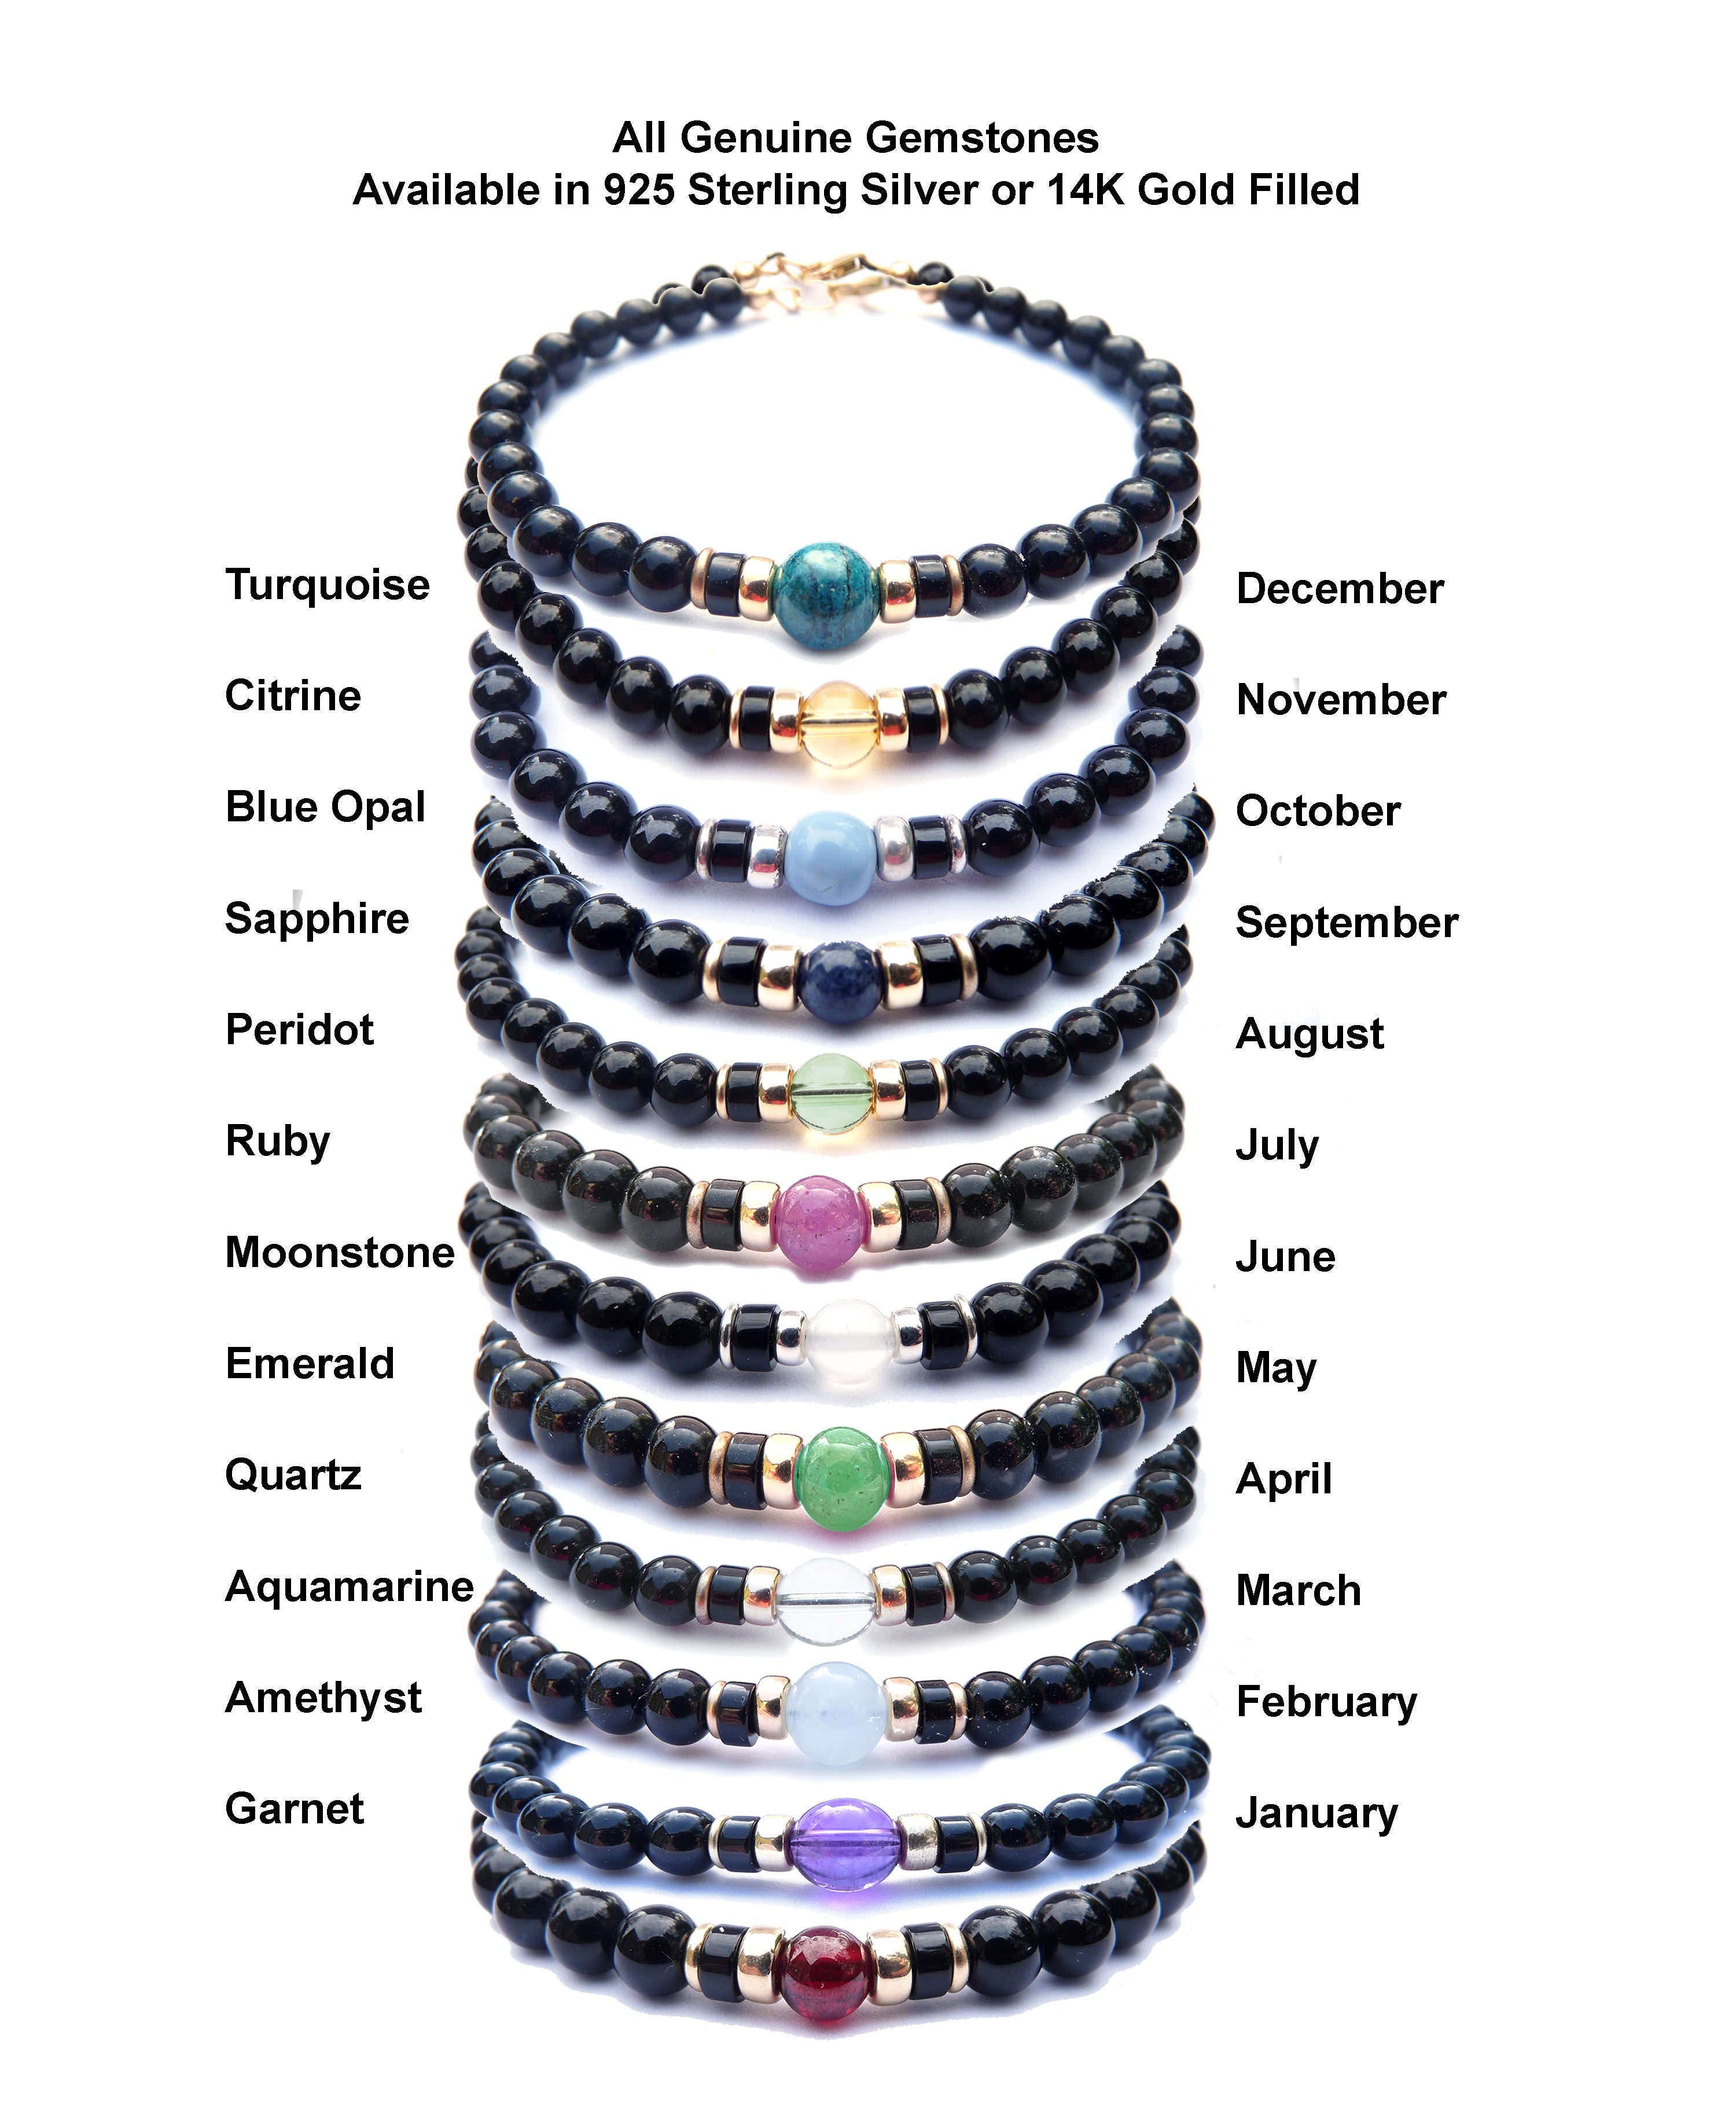 Mens Birthstone Beaded Bracelets in Black Onyx, Precious Stones, and Silver or Gold Accents. 